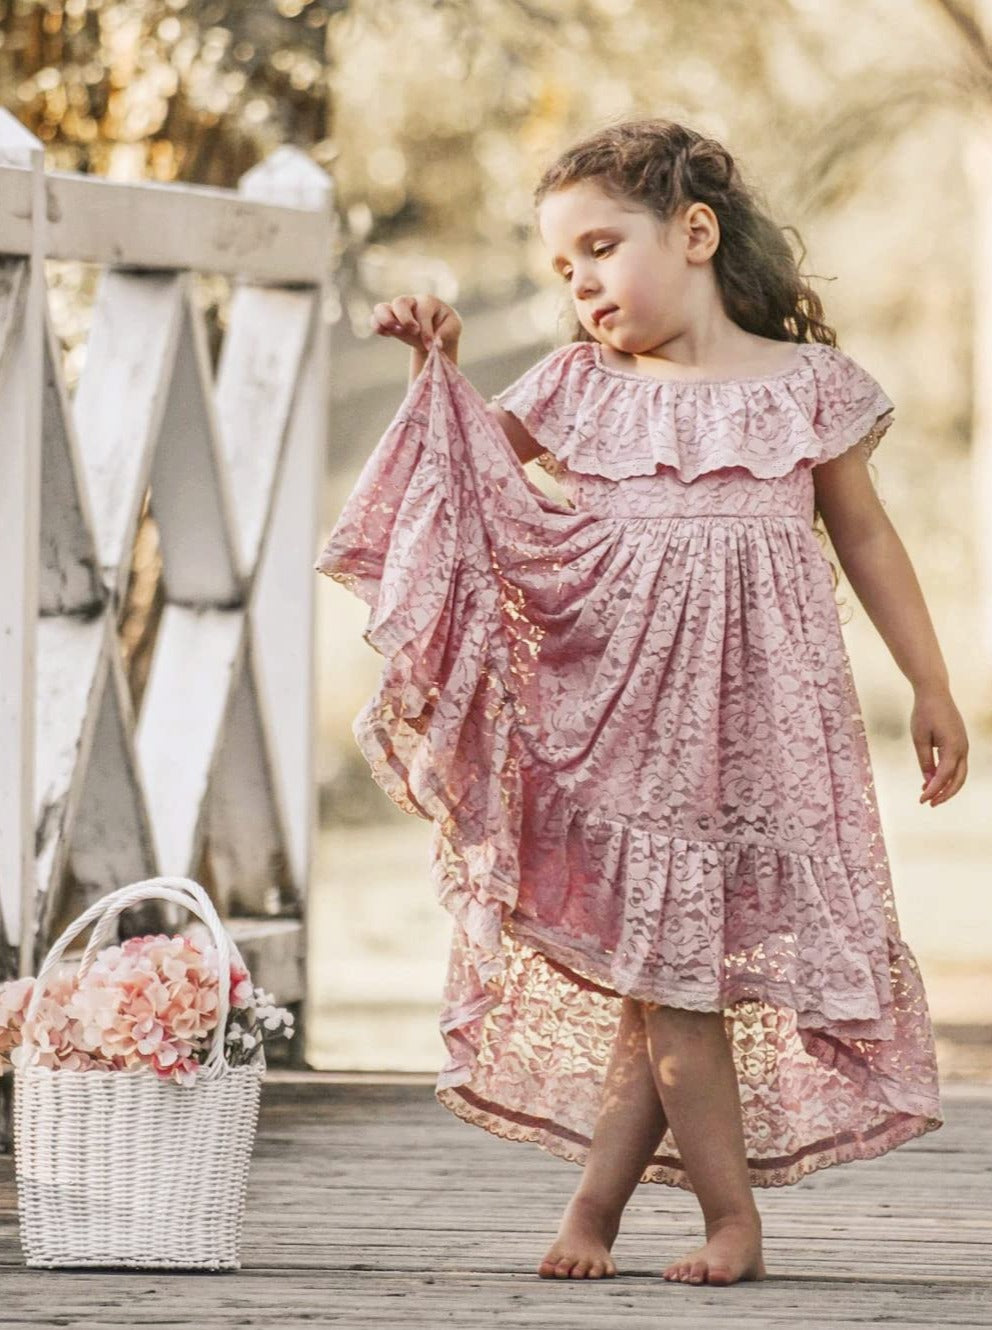 2Bunnies Flower Girl Dress Paisley All Lace Off Shoulder Maxi (Dusty Pink) - 2BUNNIES